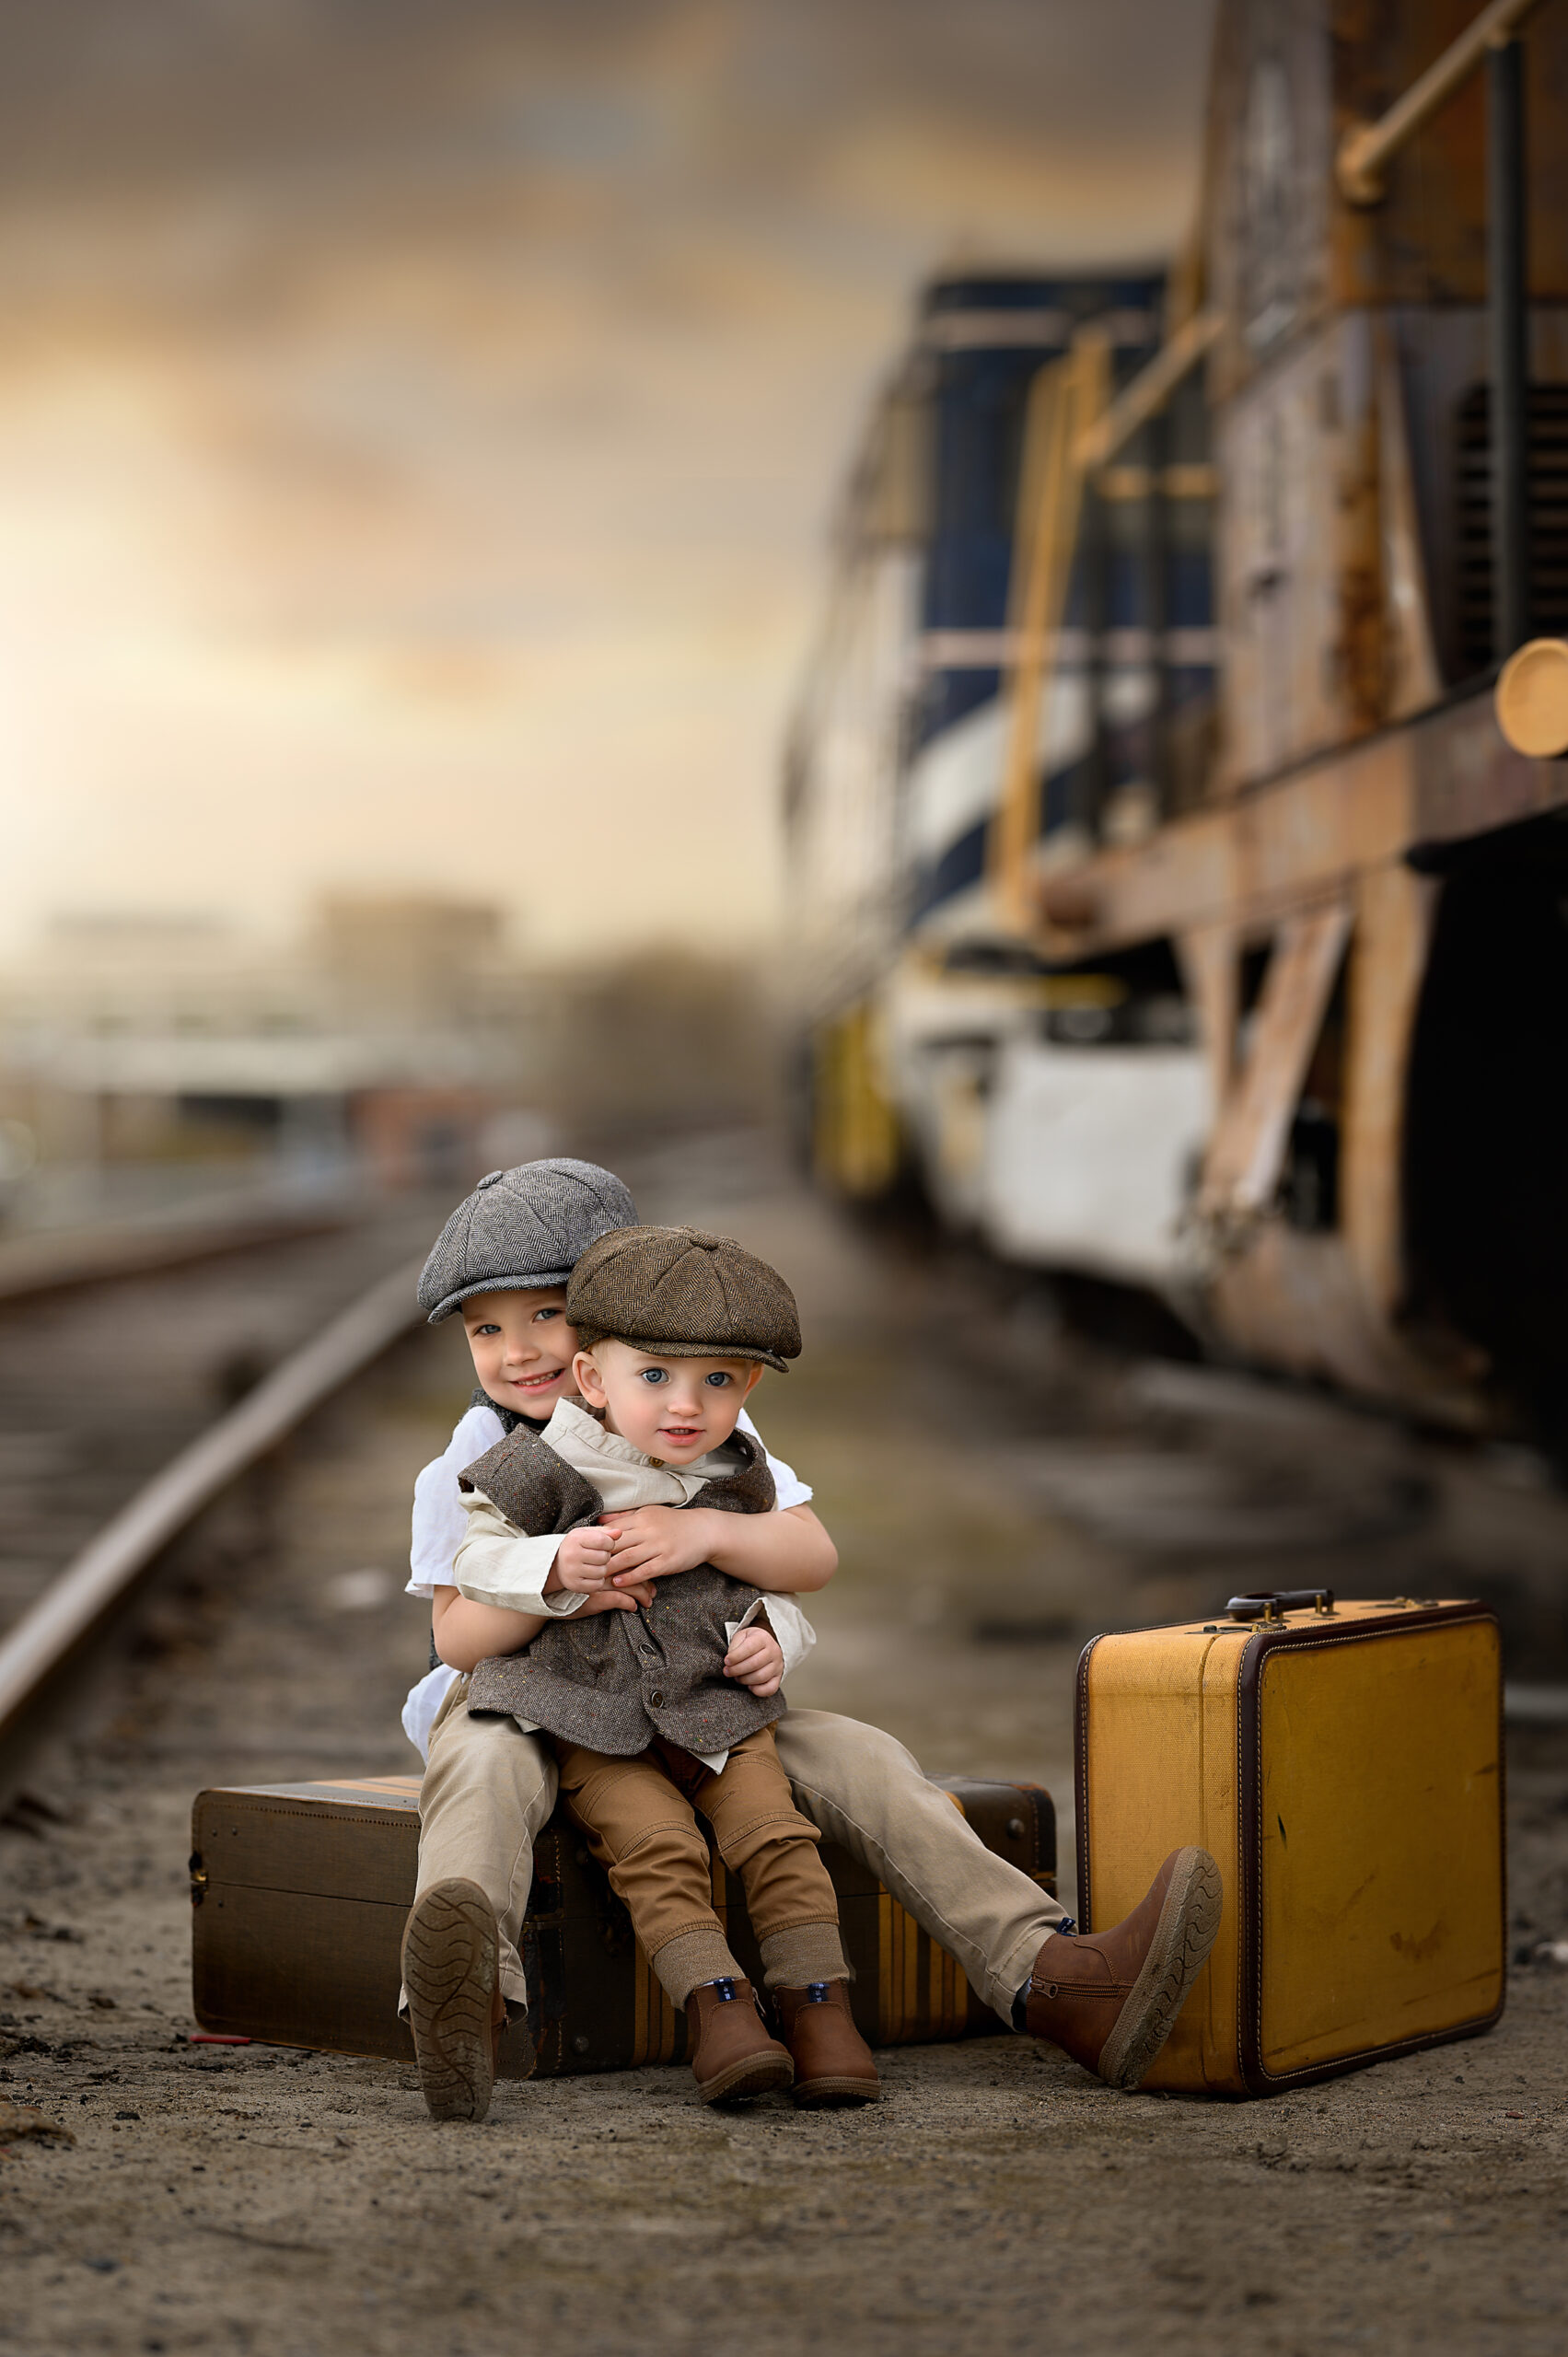 children sitting on suitcases near a train station